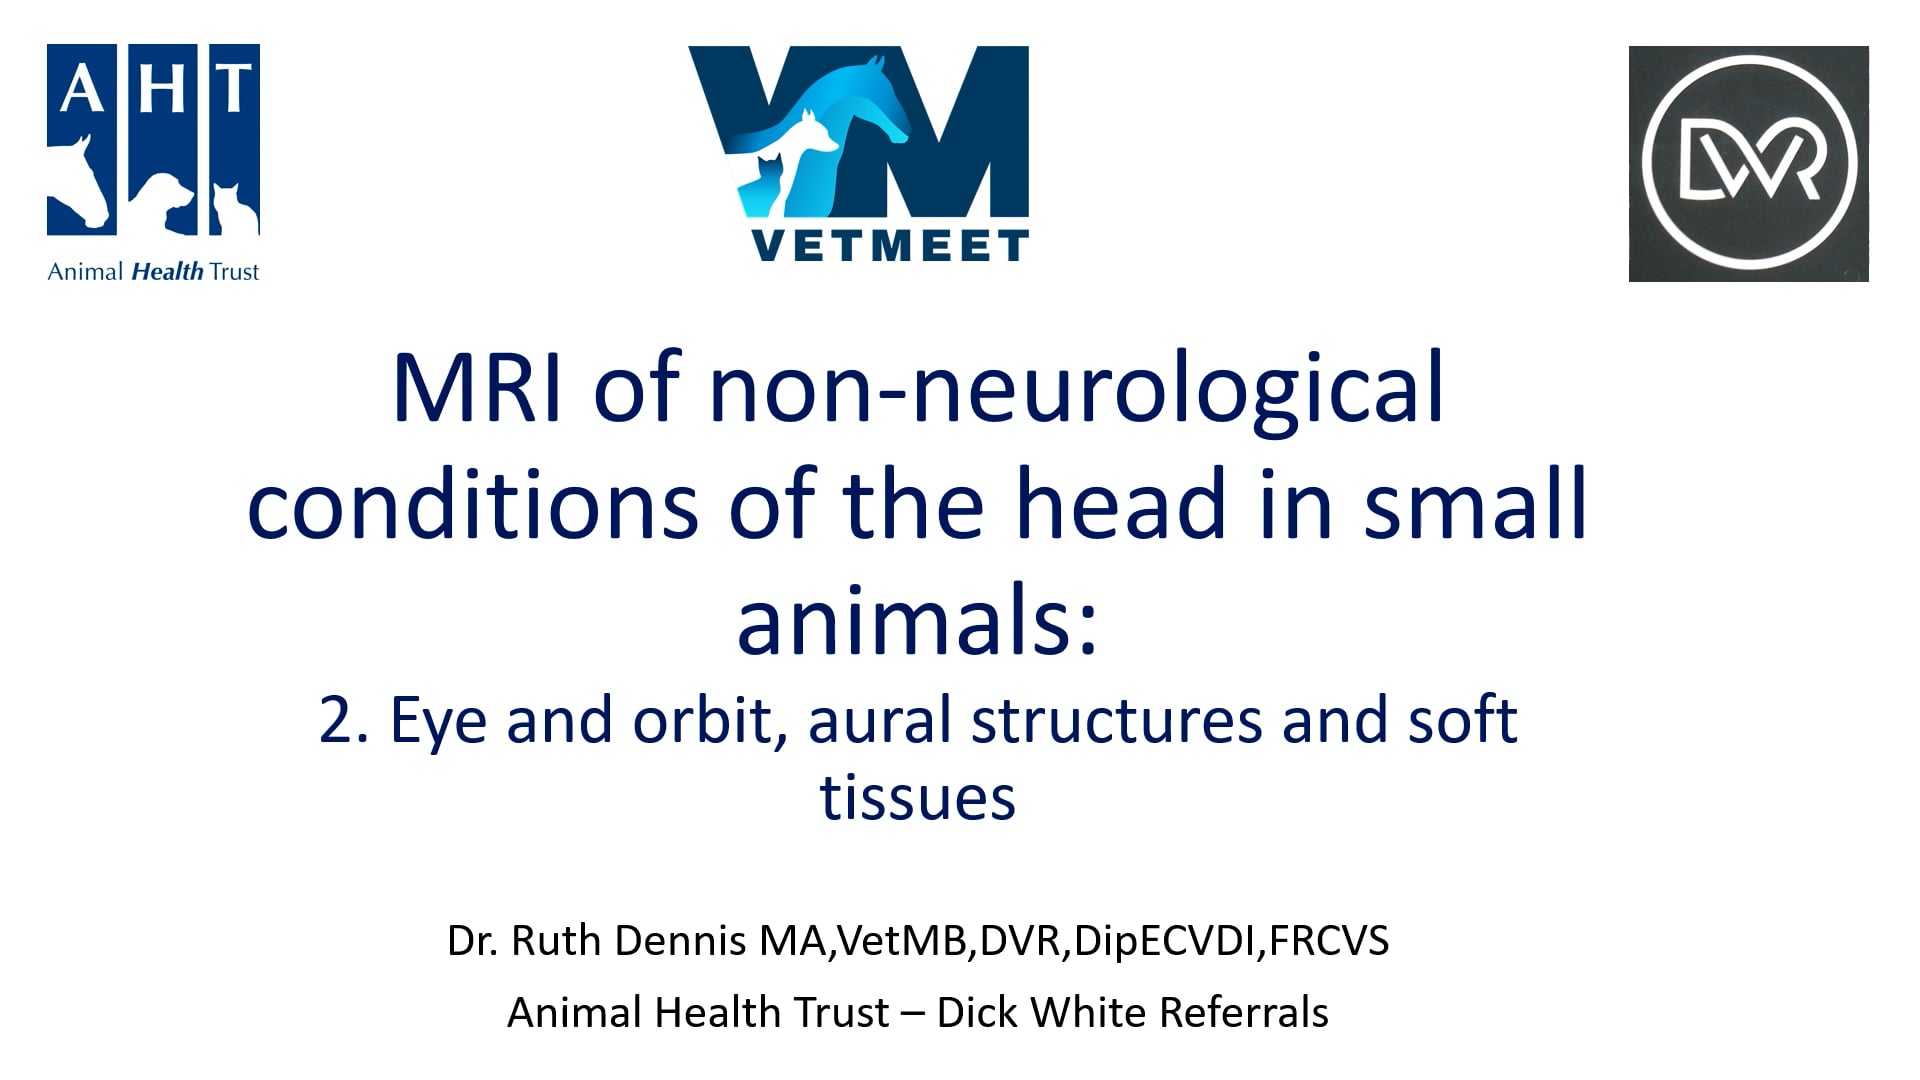 MRI of non-neurological conditions of the head in small animals: 2. Eye and orbit, ears and soft tissues.